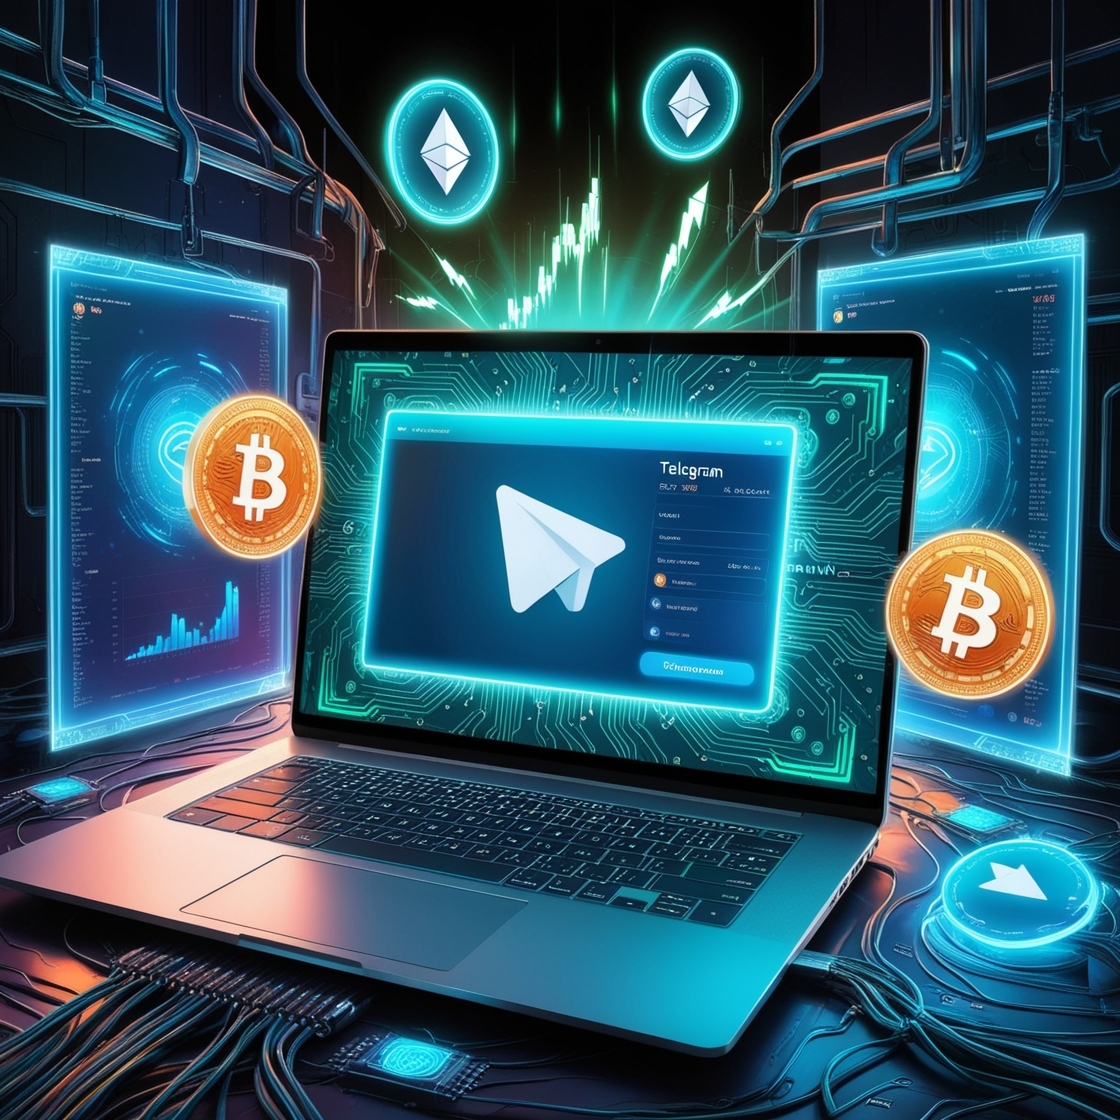 A futuristic, high-tech illustration of a Telegram interface on a sleek, silver laptop, detailed with vibrant neon lights and circuit board patterns, surrounded by holographic screens and wires, exuding a Cinematic, cyberpunk aesthetic. The palette features a mesmerizing blend of electric blues, pulsing greens, and radiant oranges, evoking a sense of innovation and progress. Cryptocurrency symbols and charts hover above the screen, while subtle glitch effects add a touch of modernity, hinting at the limitless possibilities of earning cryptocurrency through Telegram.